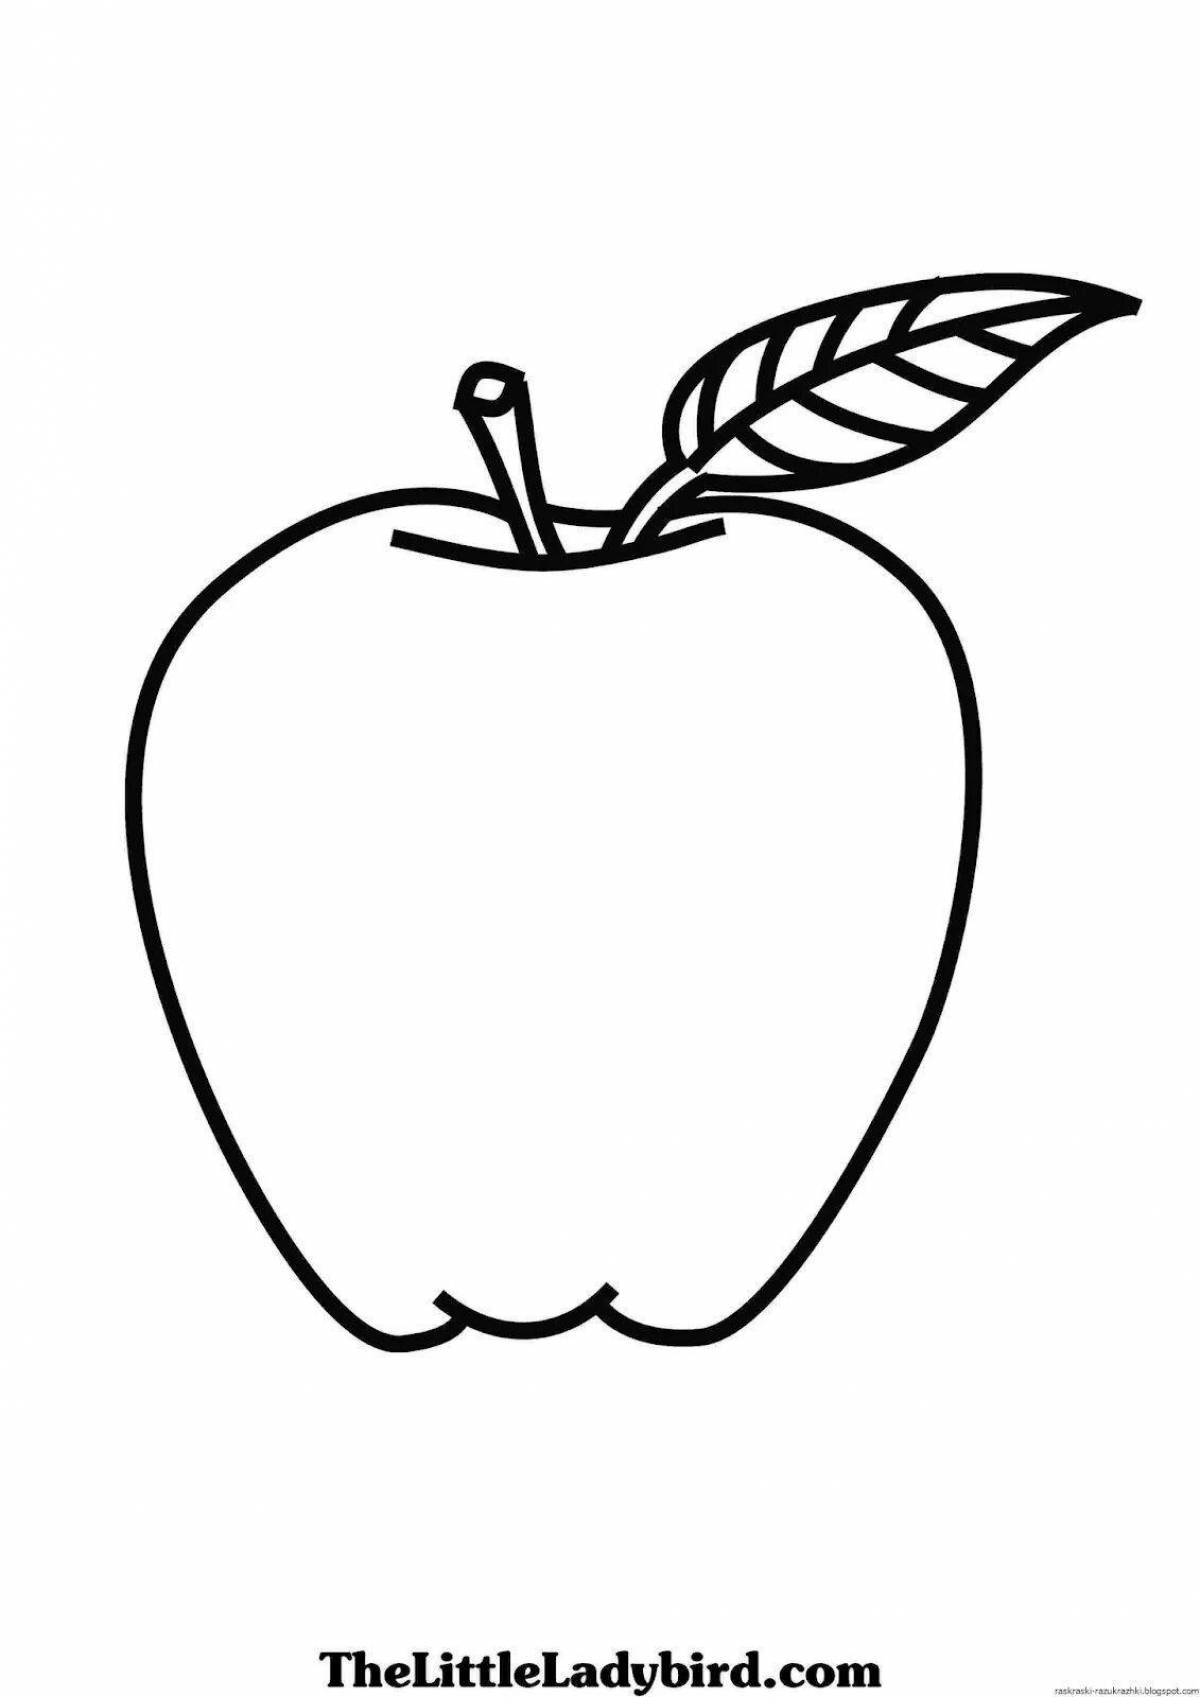 Coloring book sparkling apple